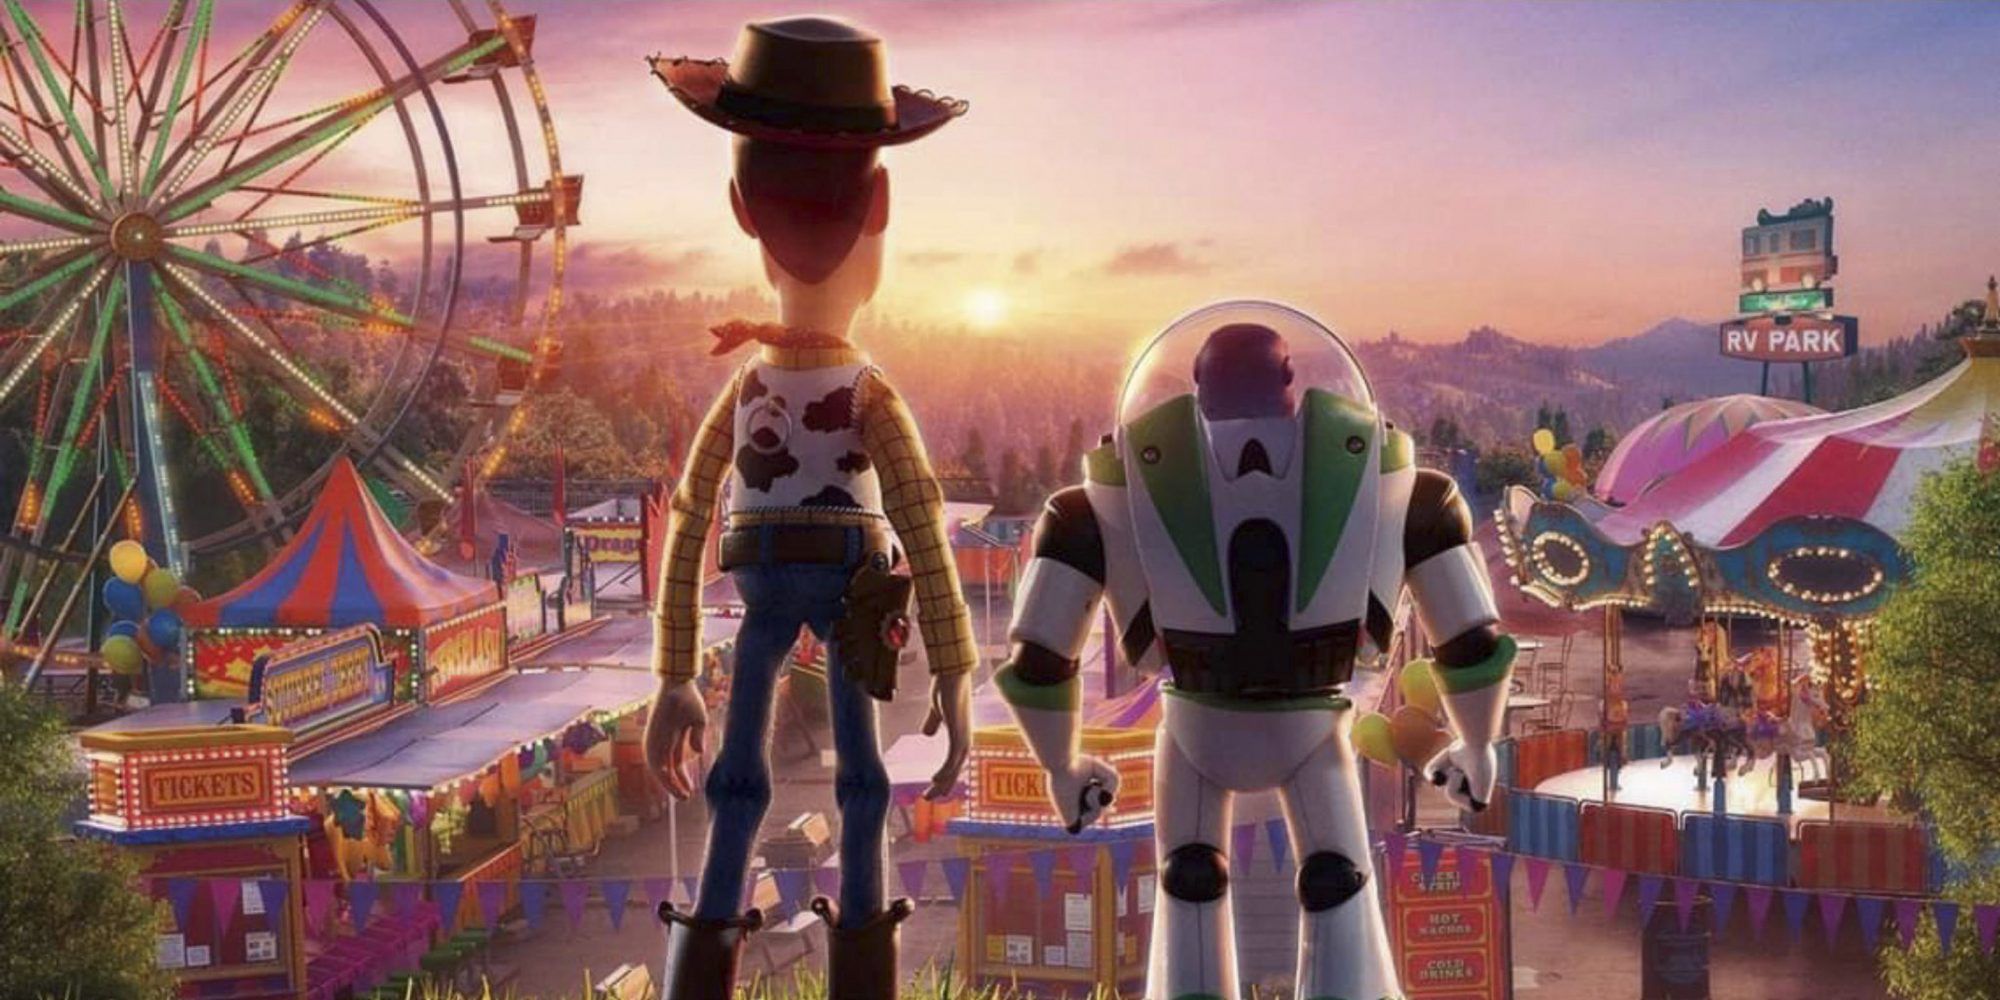 Buzz Lightyear and Woody stand looking over the carnival in Toy Story 4